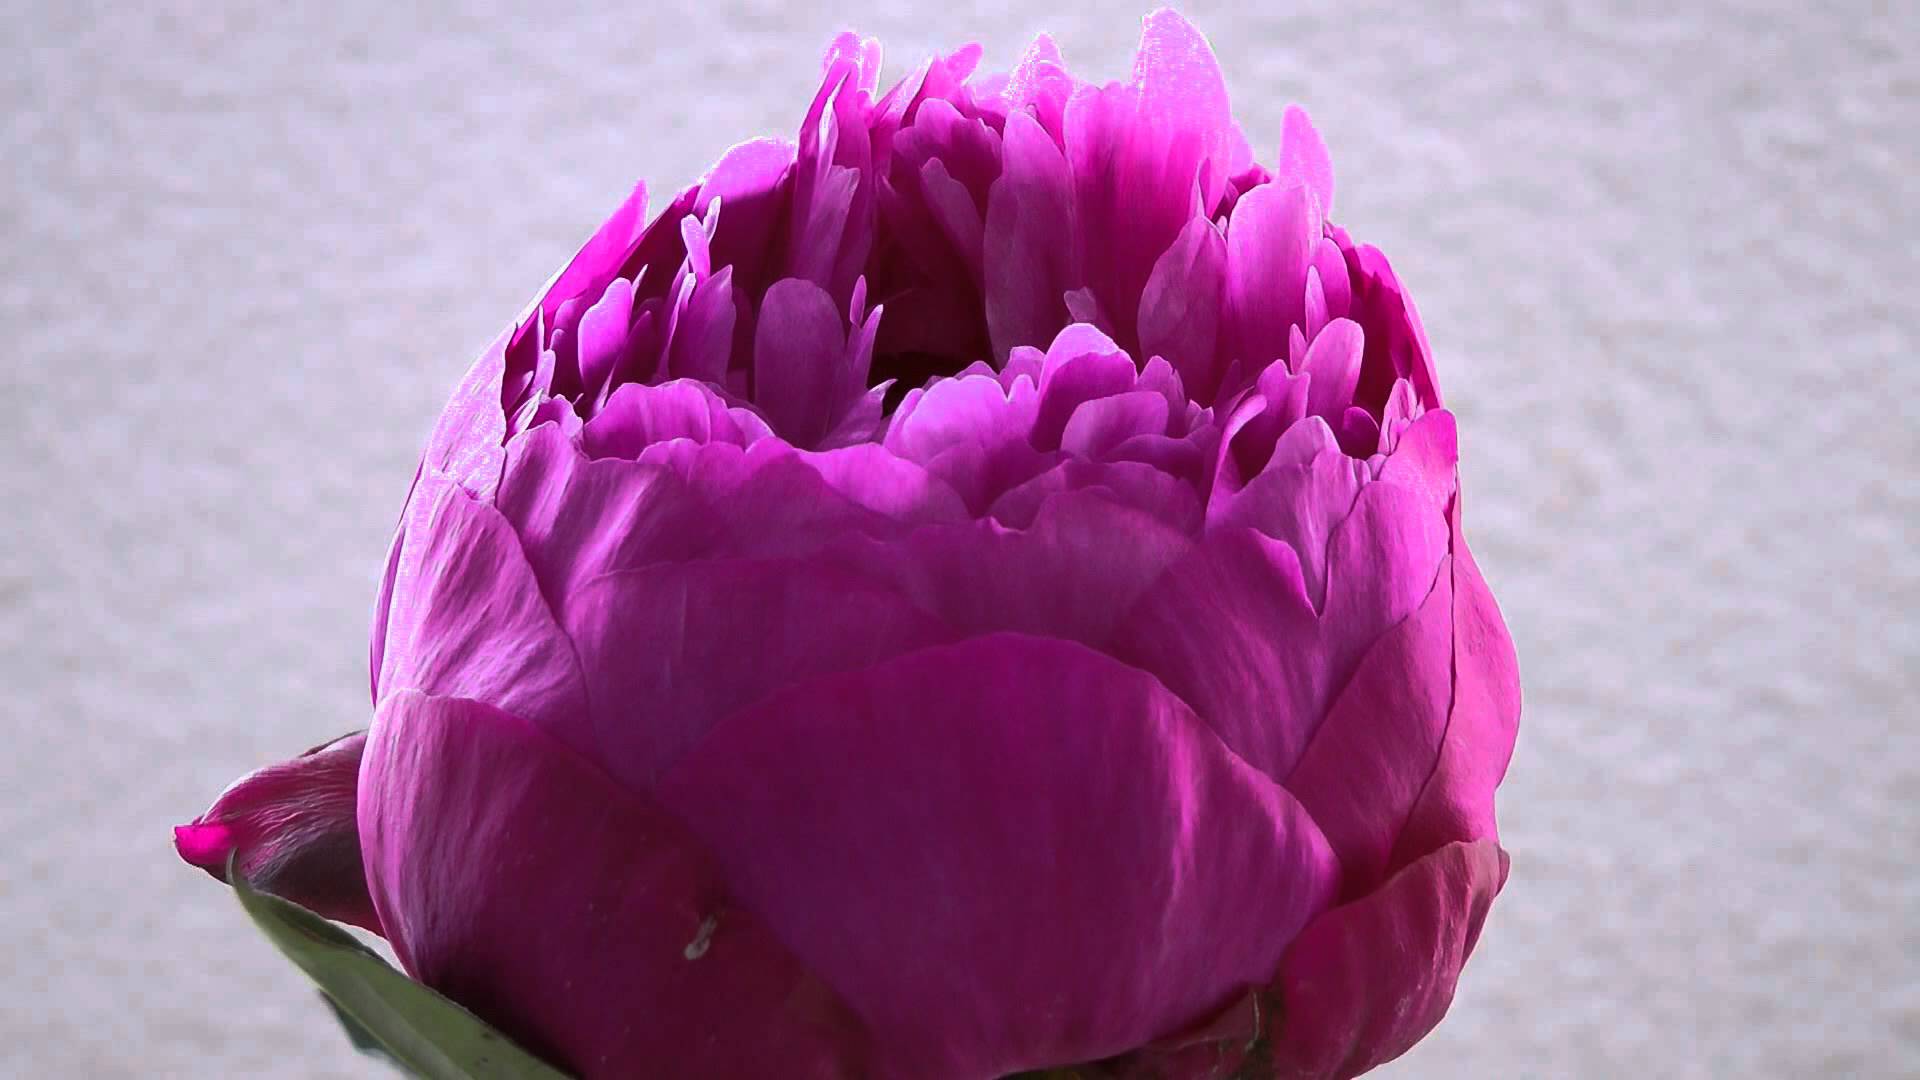 Blooming Flower Test - YouTube